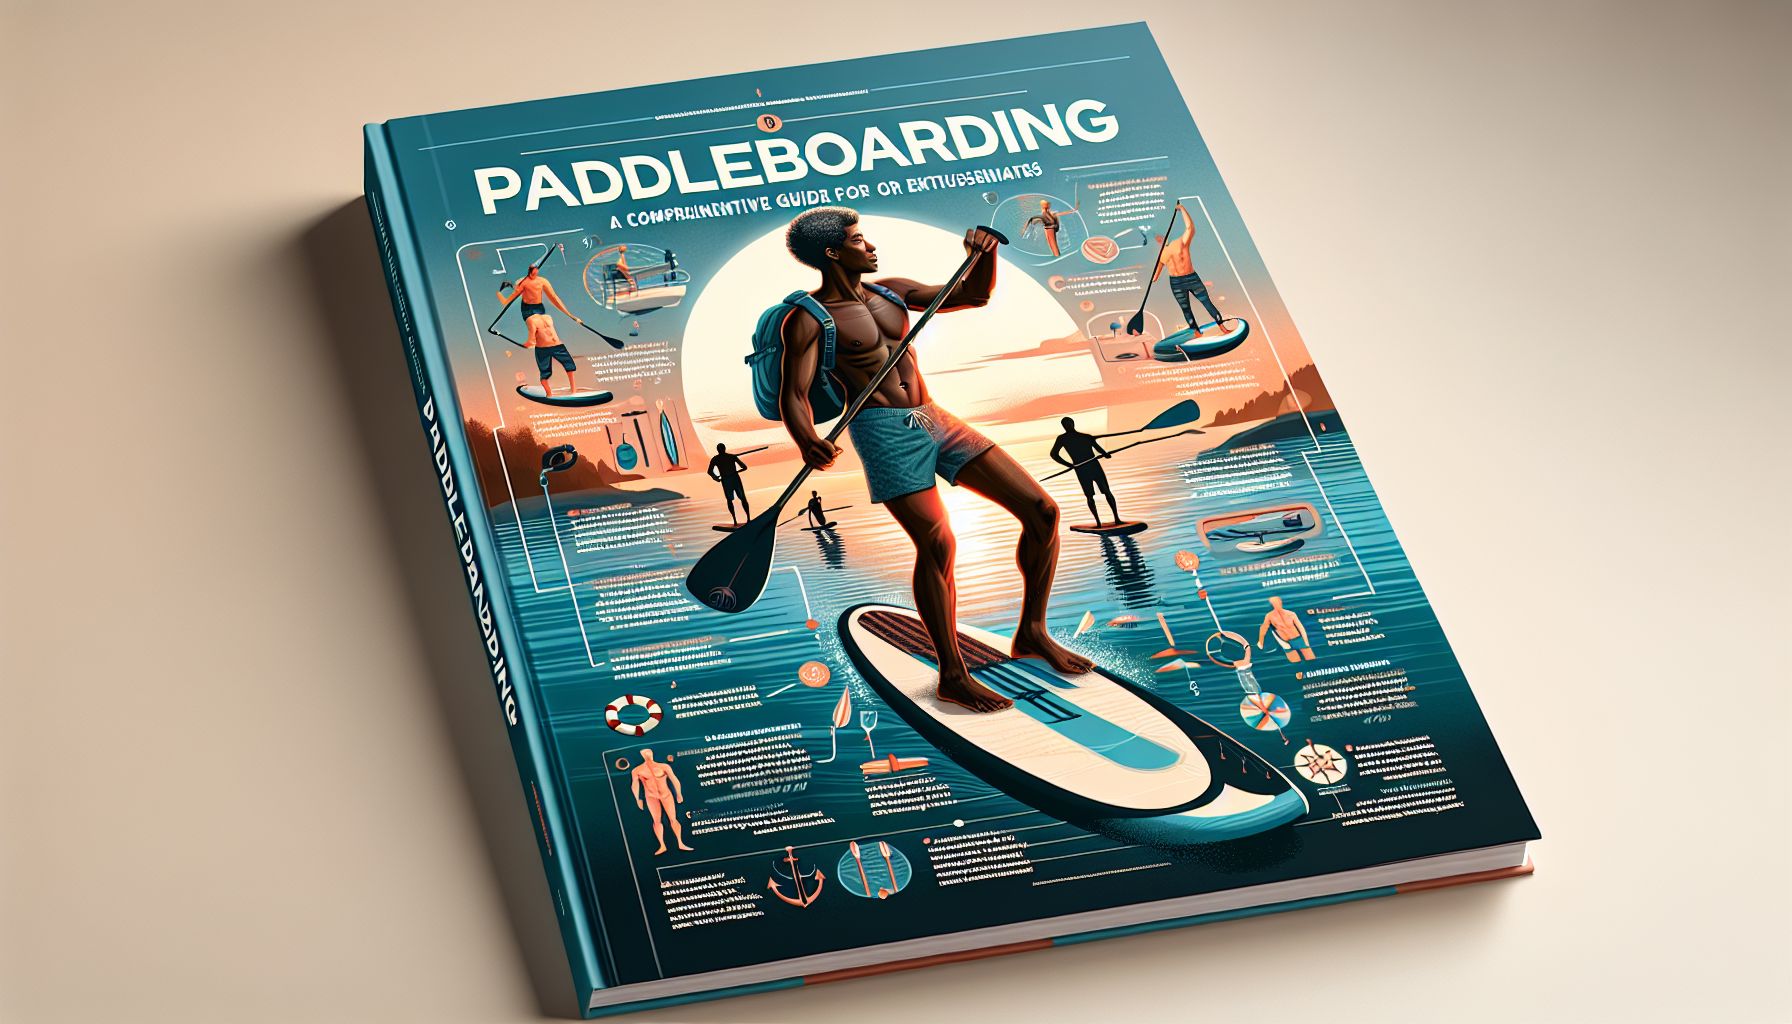 Paddleboarding: A Comprehensive Guide for Enthusiasts